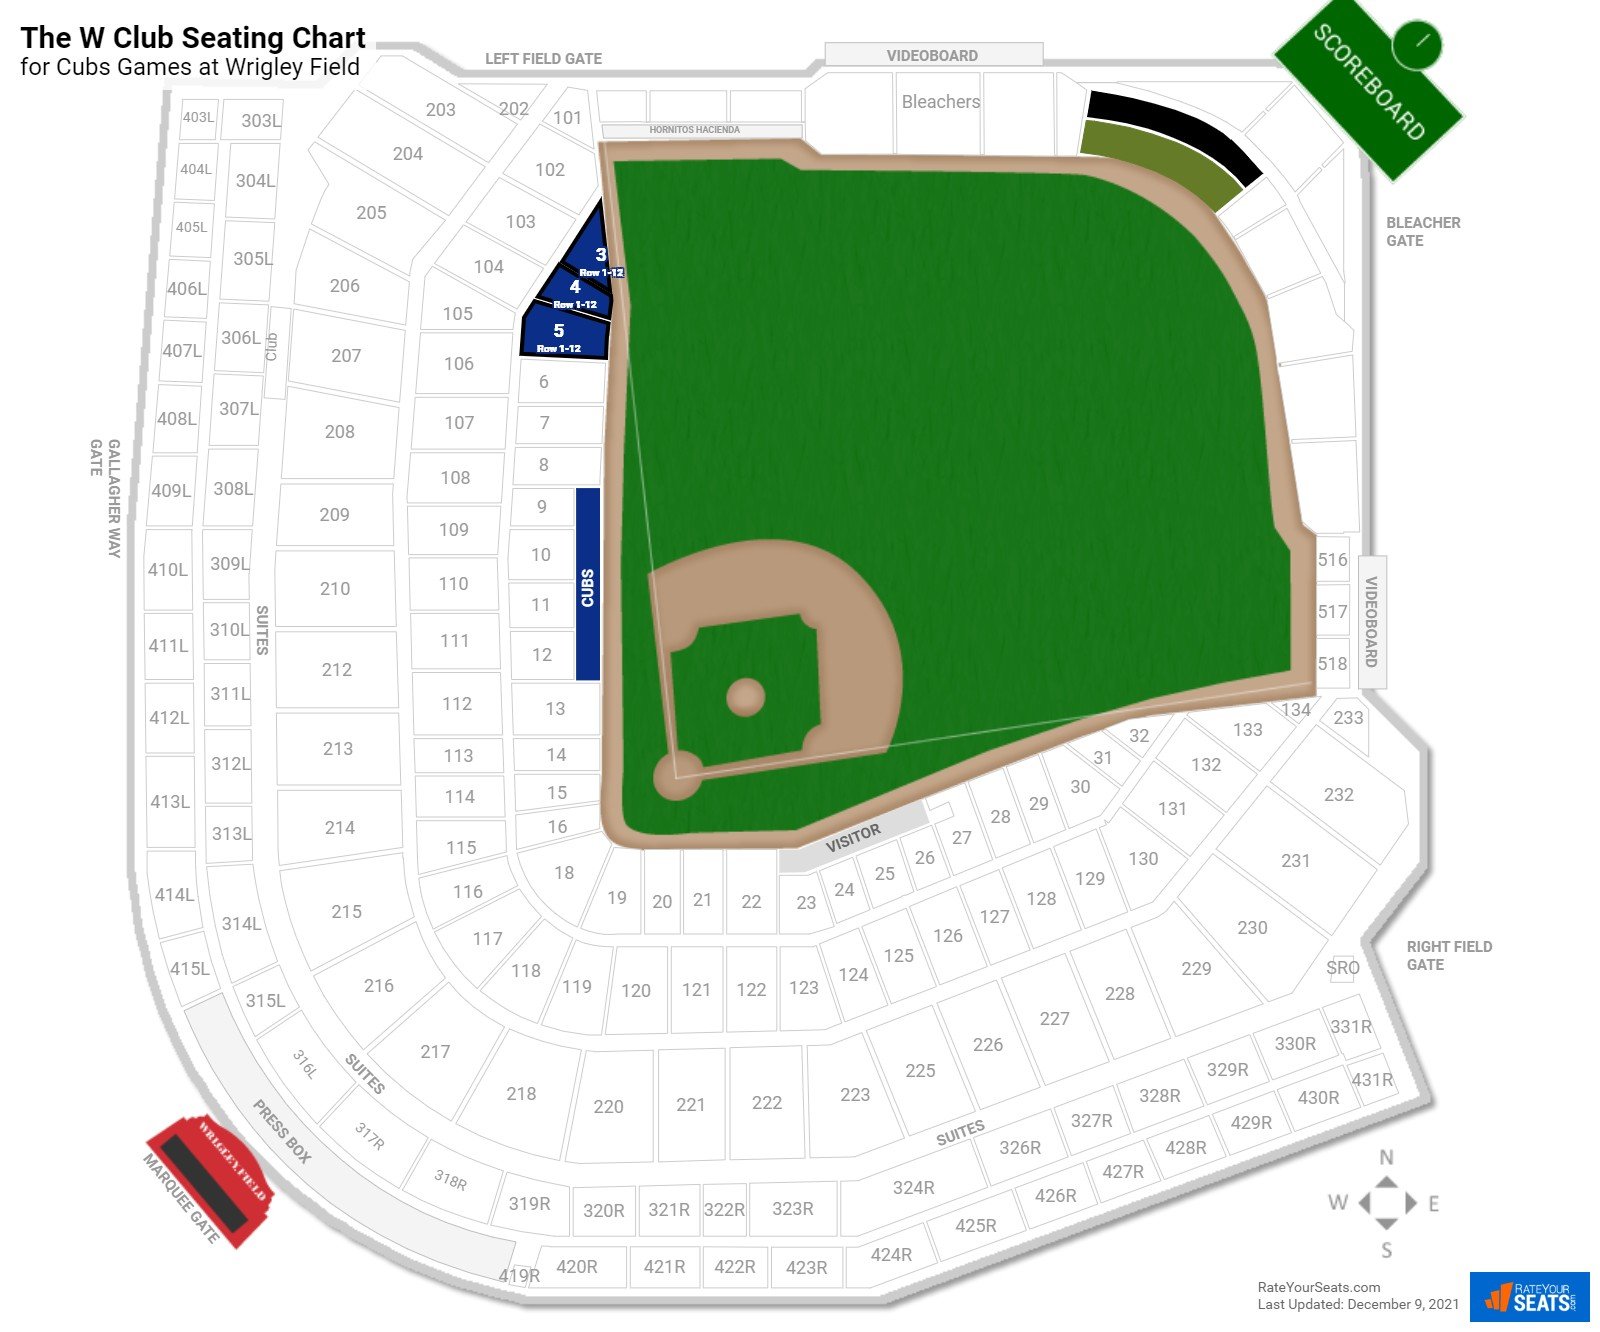 Cubs The W Club Seating Chart at Wrigley Field